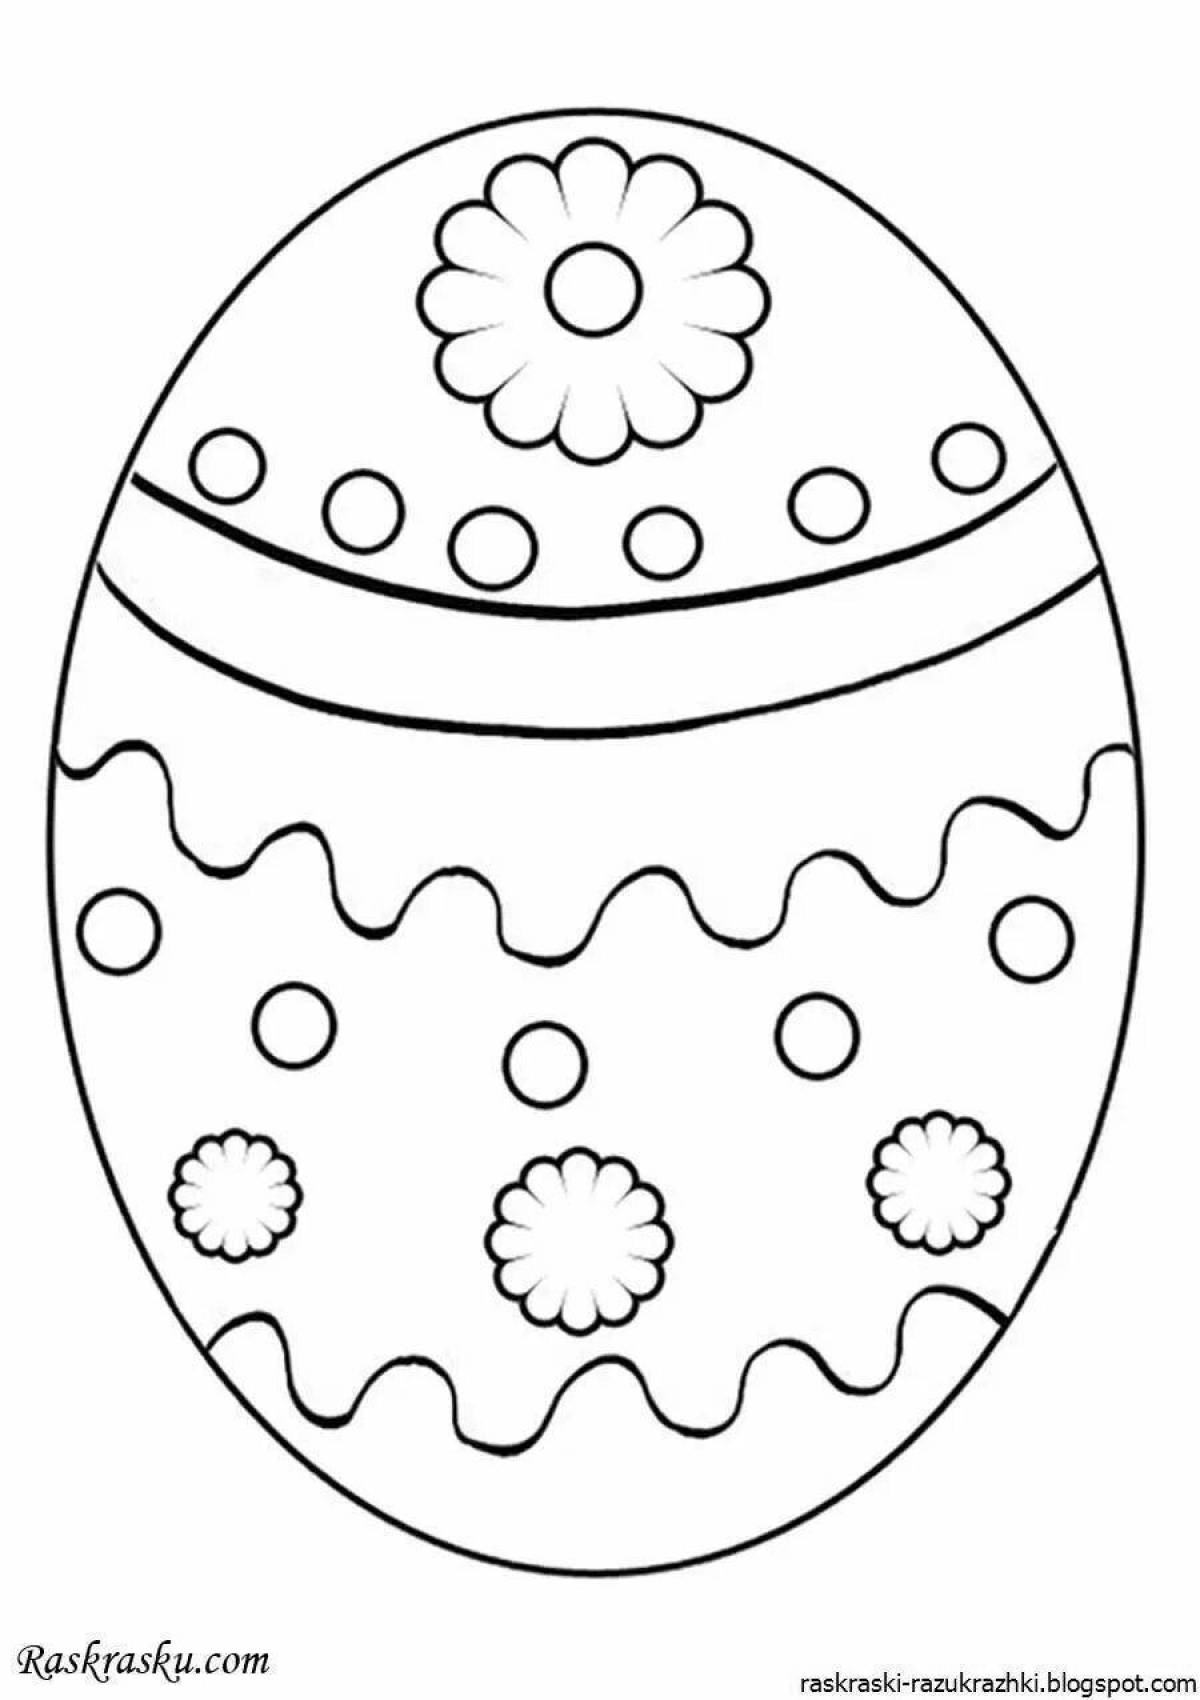 Fabulous testicles coloring page